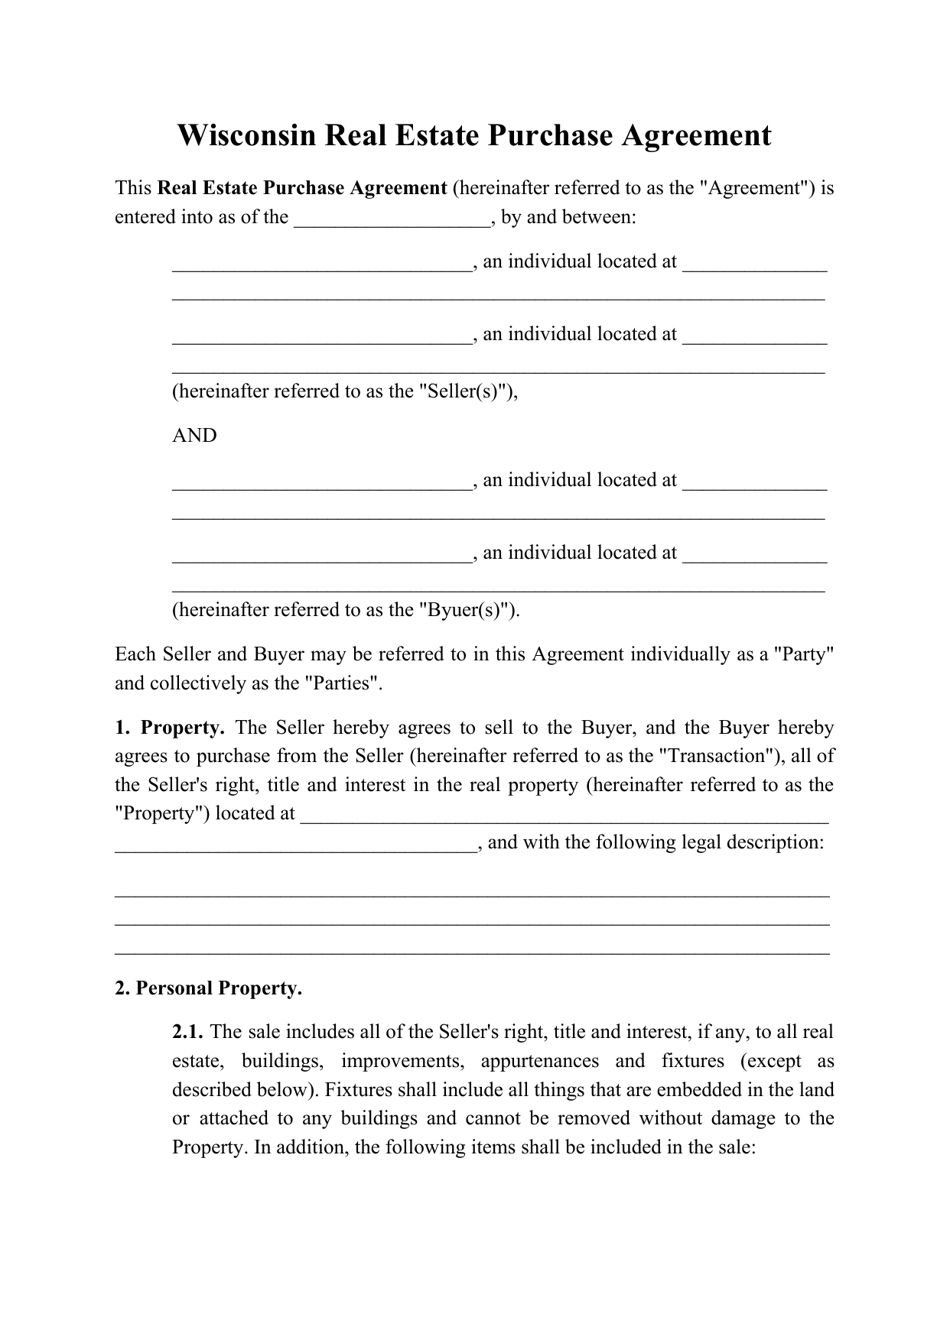 Wisconsin Real Estate Purchase Agreement Template Fill Out Sign 